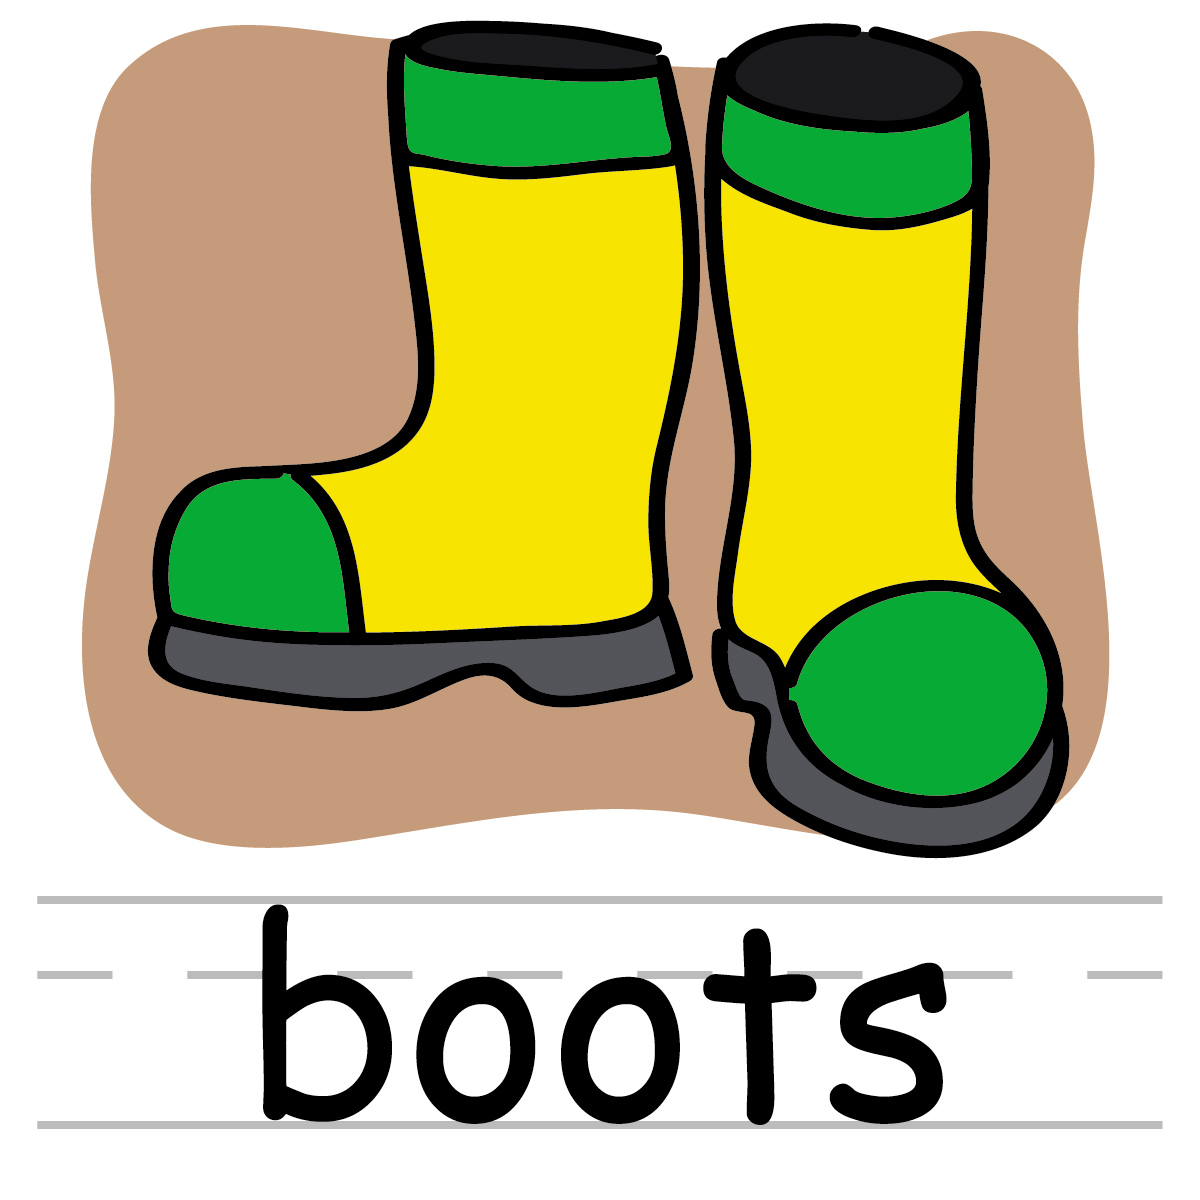 Baby Cowboy Boots Clipart   Clipart Panda   Free Clipart Images